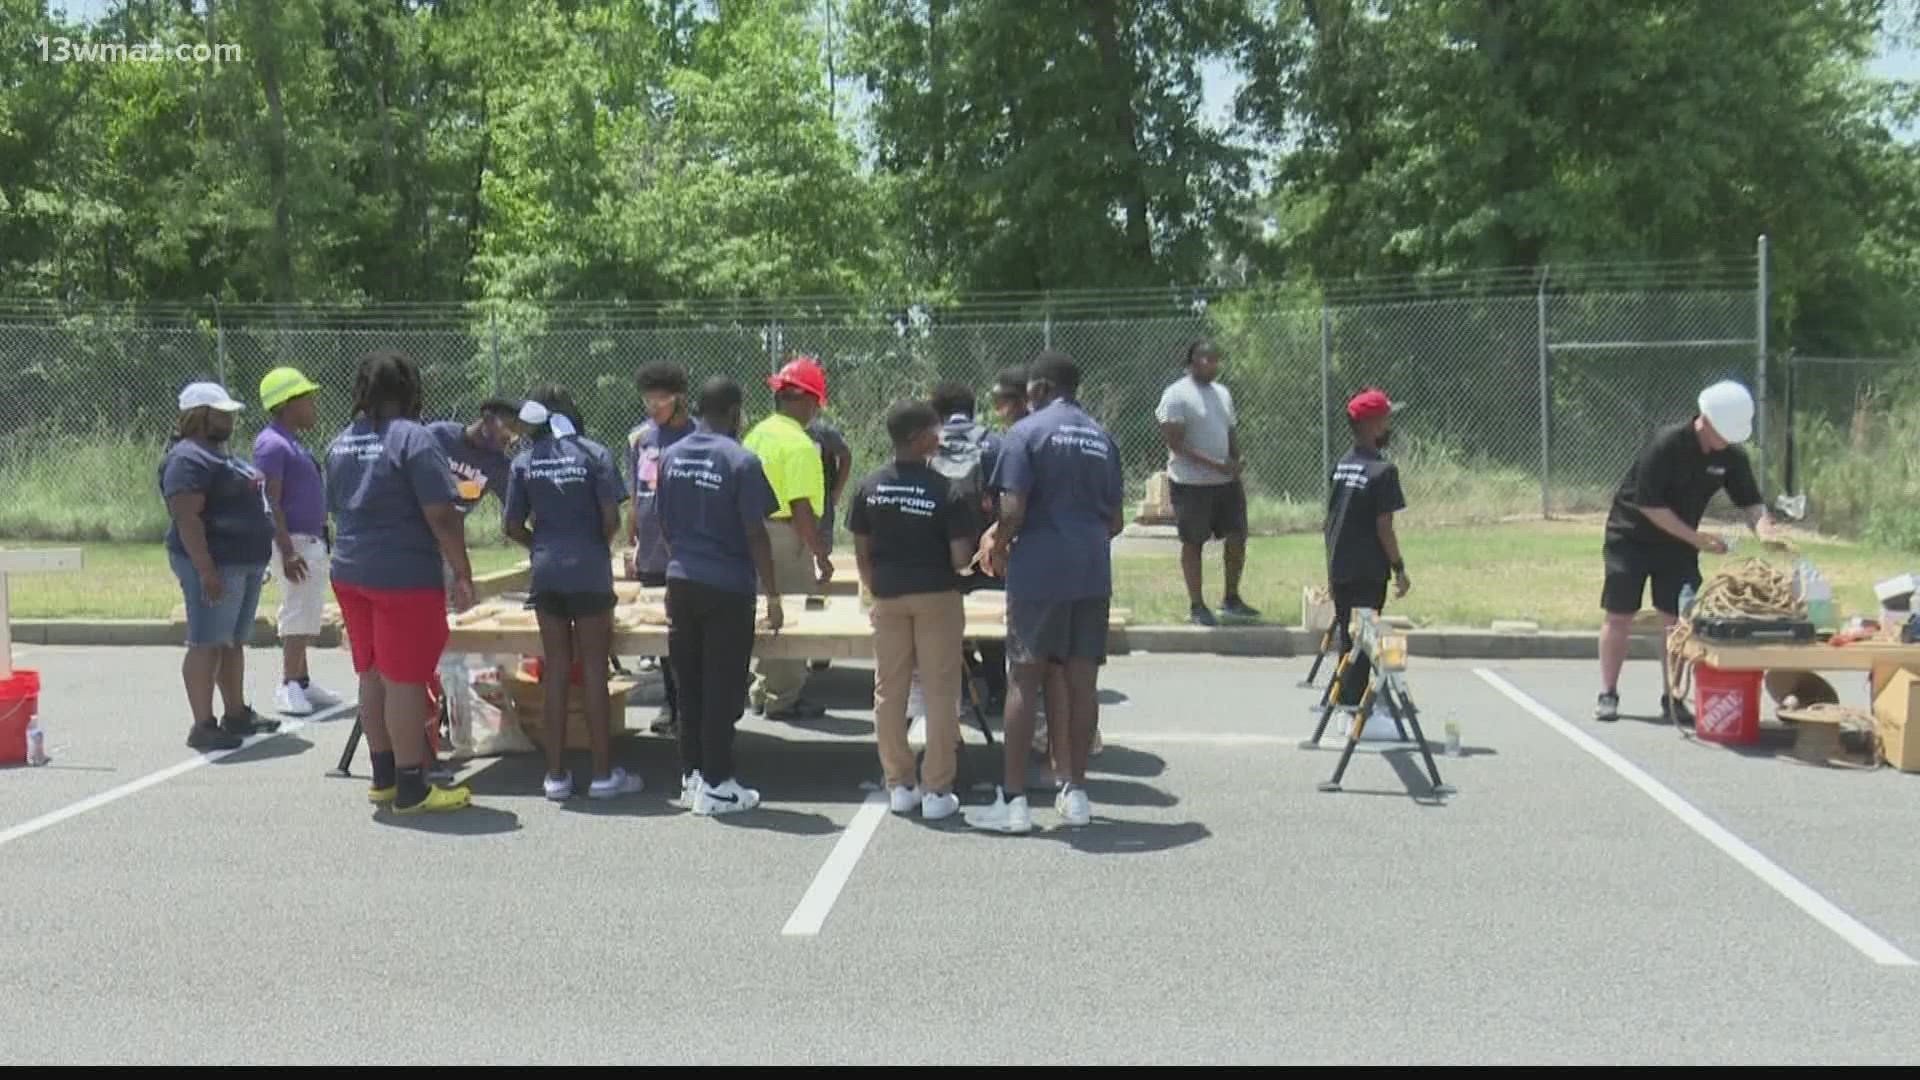 Children in Macon were able to get a hands-on experience in the construction industry.